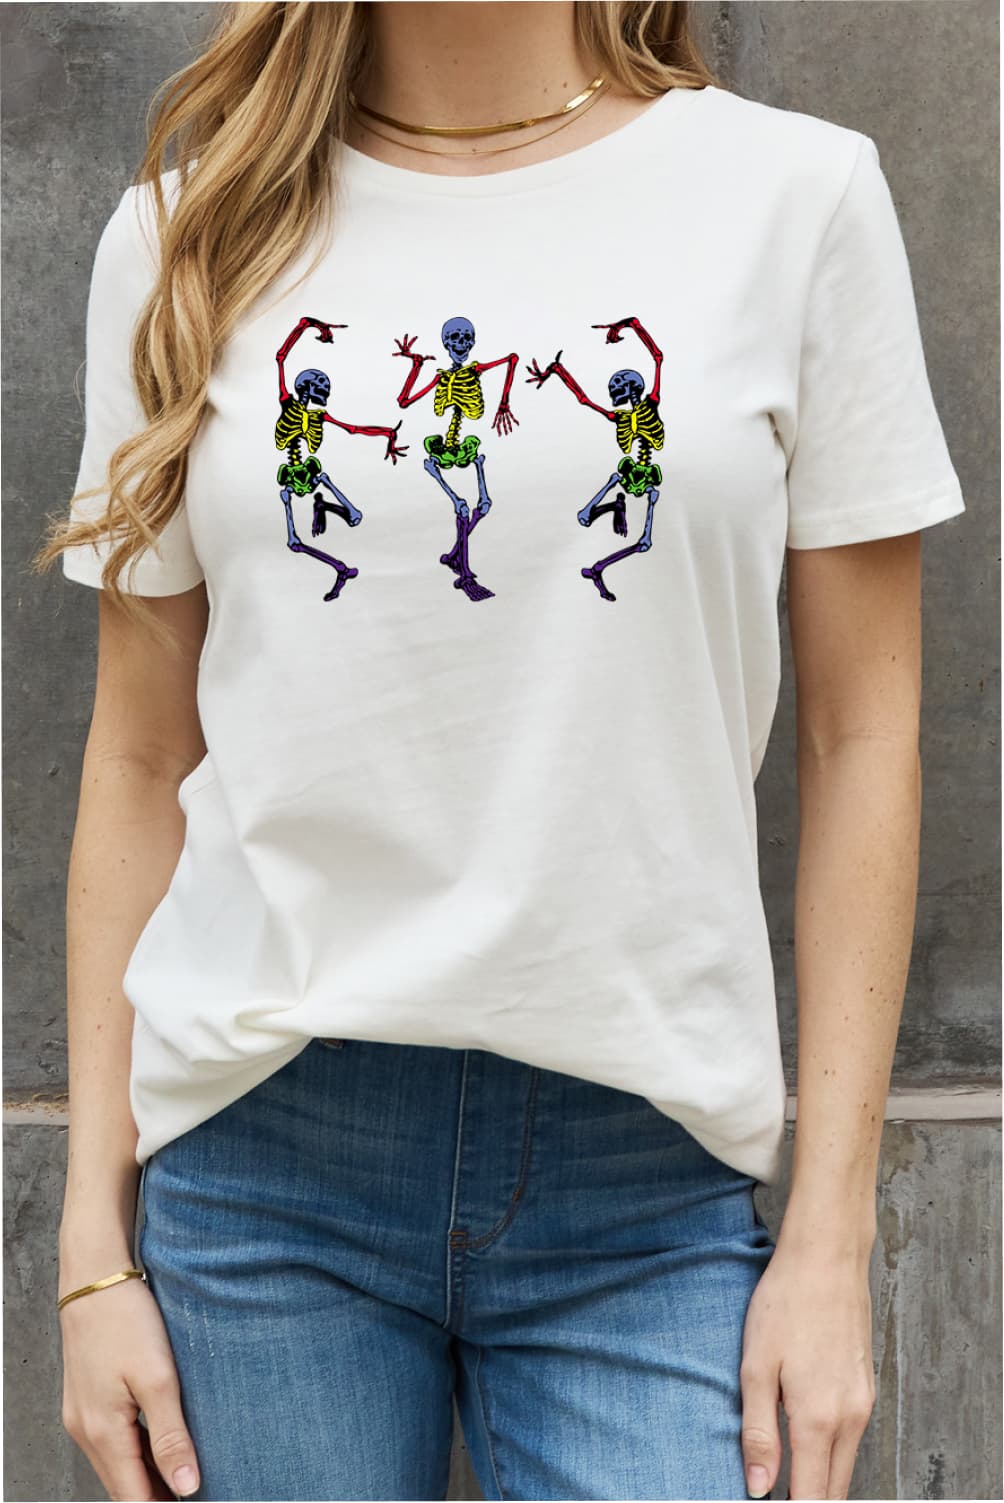 Simply Love Full Size Dancing Skeleton Graphic Cotton Tee